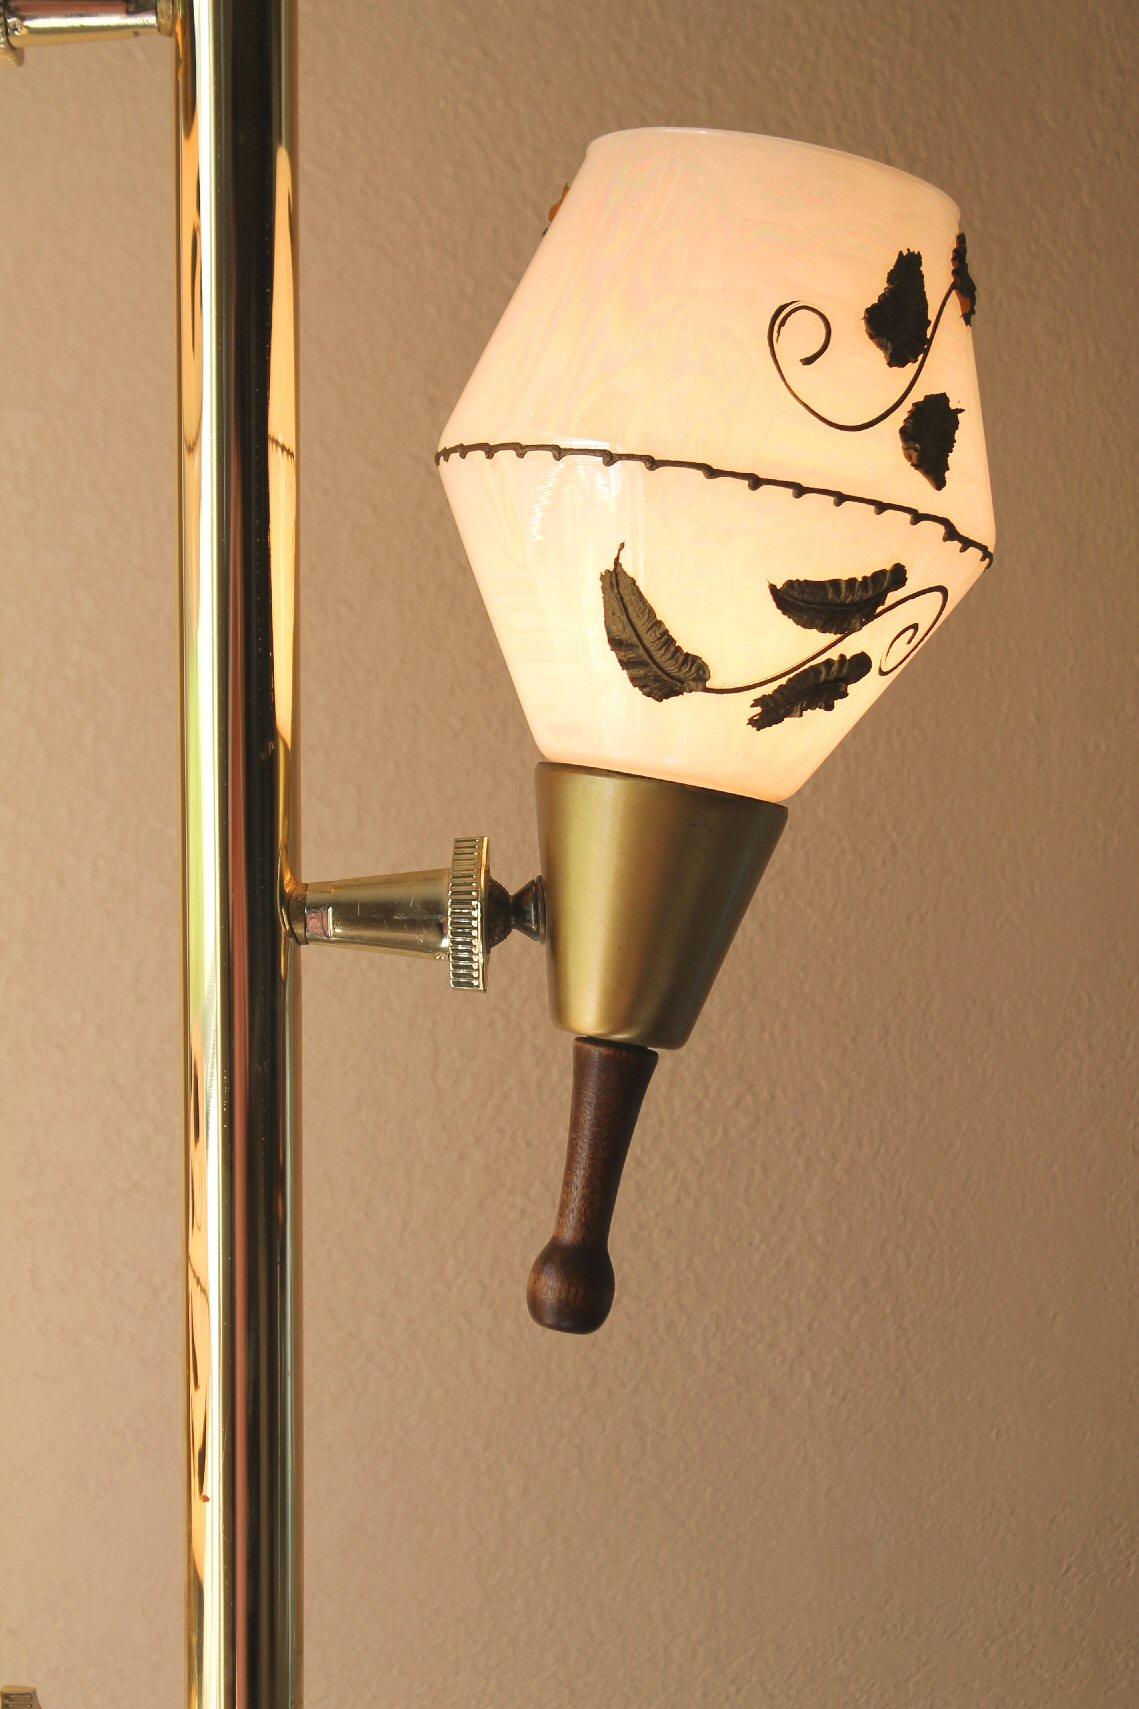 1950s tension pole lamp